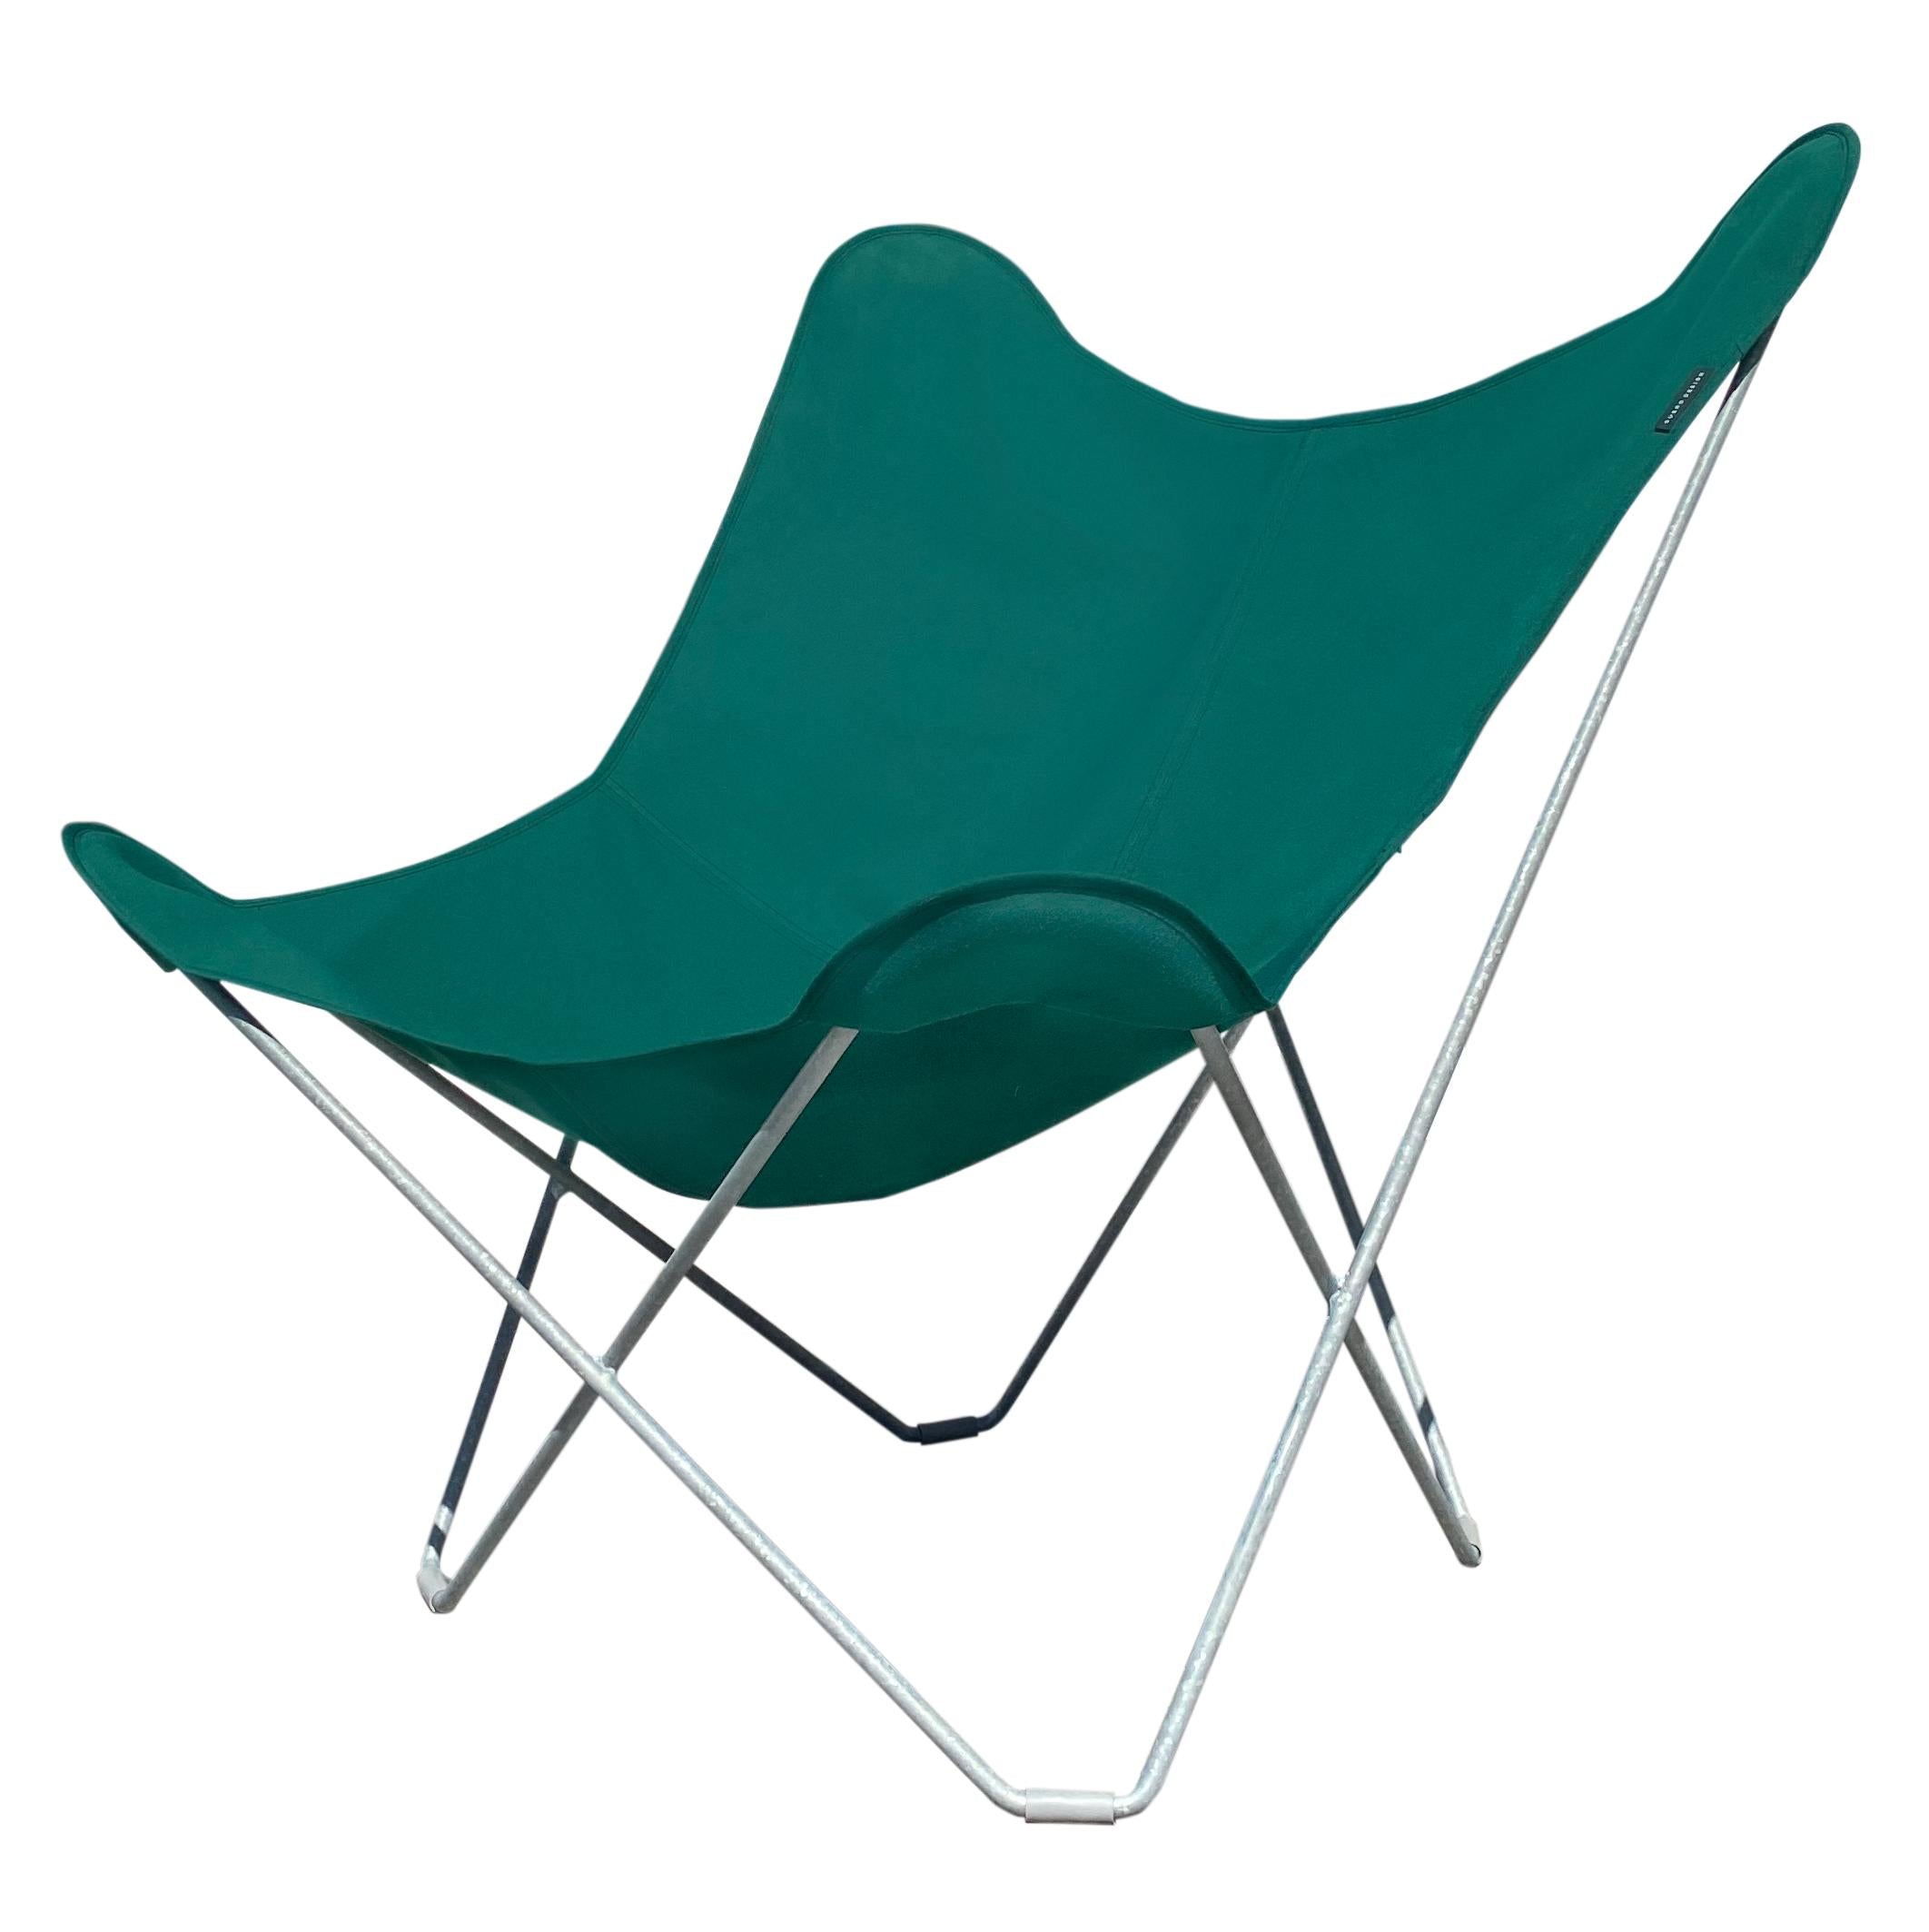 Cuero Sunshine Mariposa Butterfly Chair, Forest Green/Grey Outdoor Frame